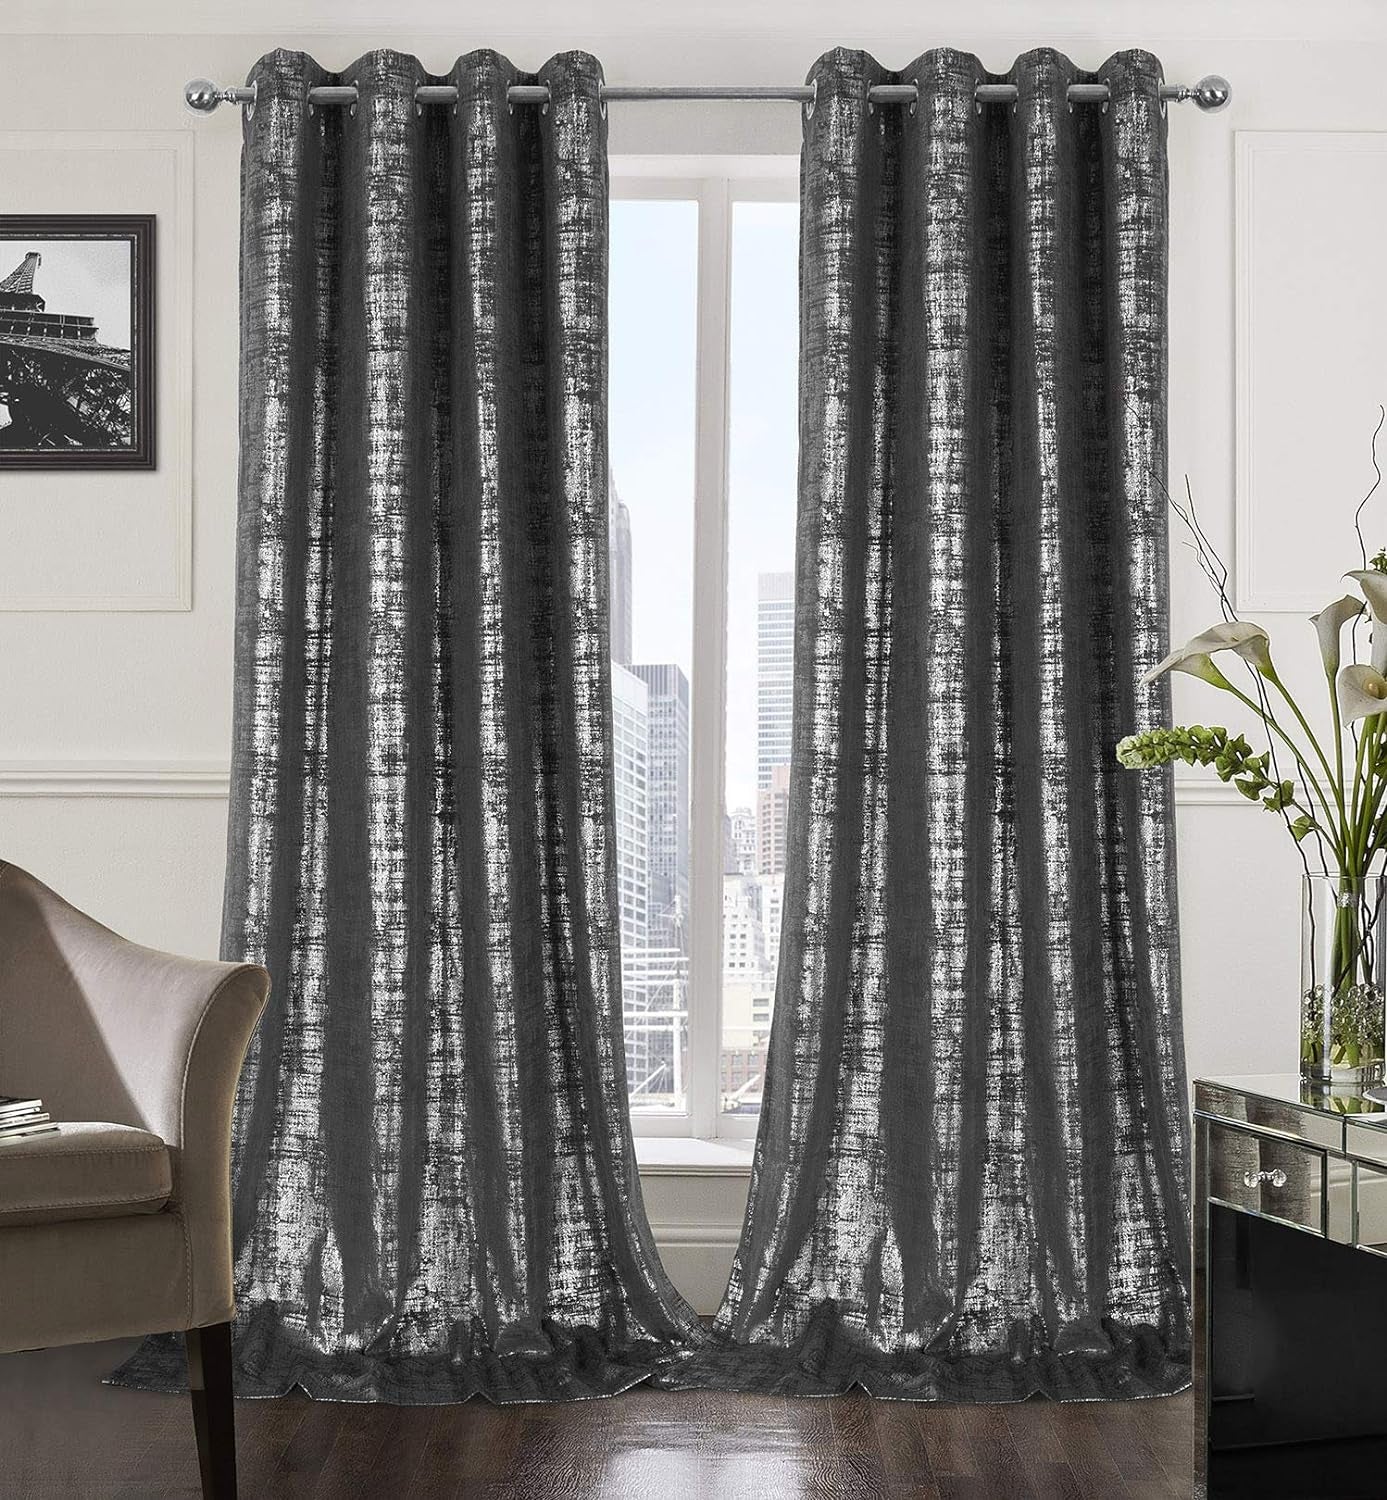 Always4U Soft Velvet Curtains 95 Inch Length Luxury Bedroom Curtains Gold Foil Print Window Curtains for Living Room 1 Panel White  always4u Charcoal Grey (Silver Print) 2 Panels: 52''W*108''L 